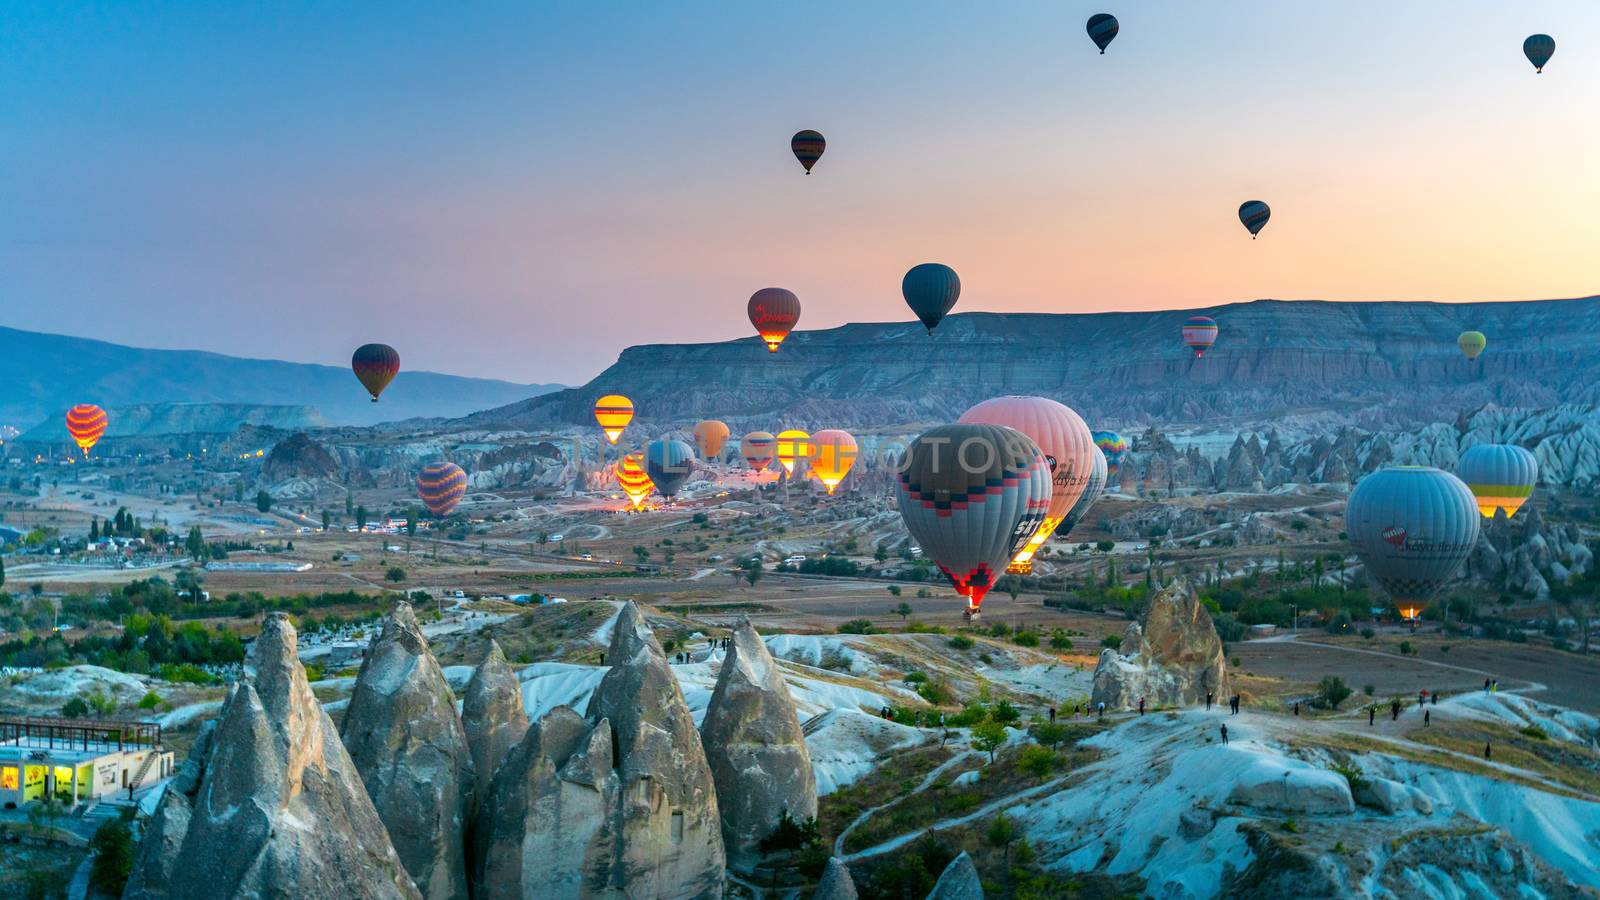 Colorful hot air balloon flying over Cappadocia, Turkey. by gutarphotoghaphy